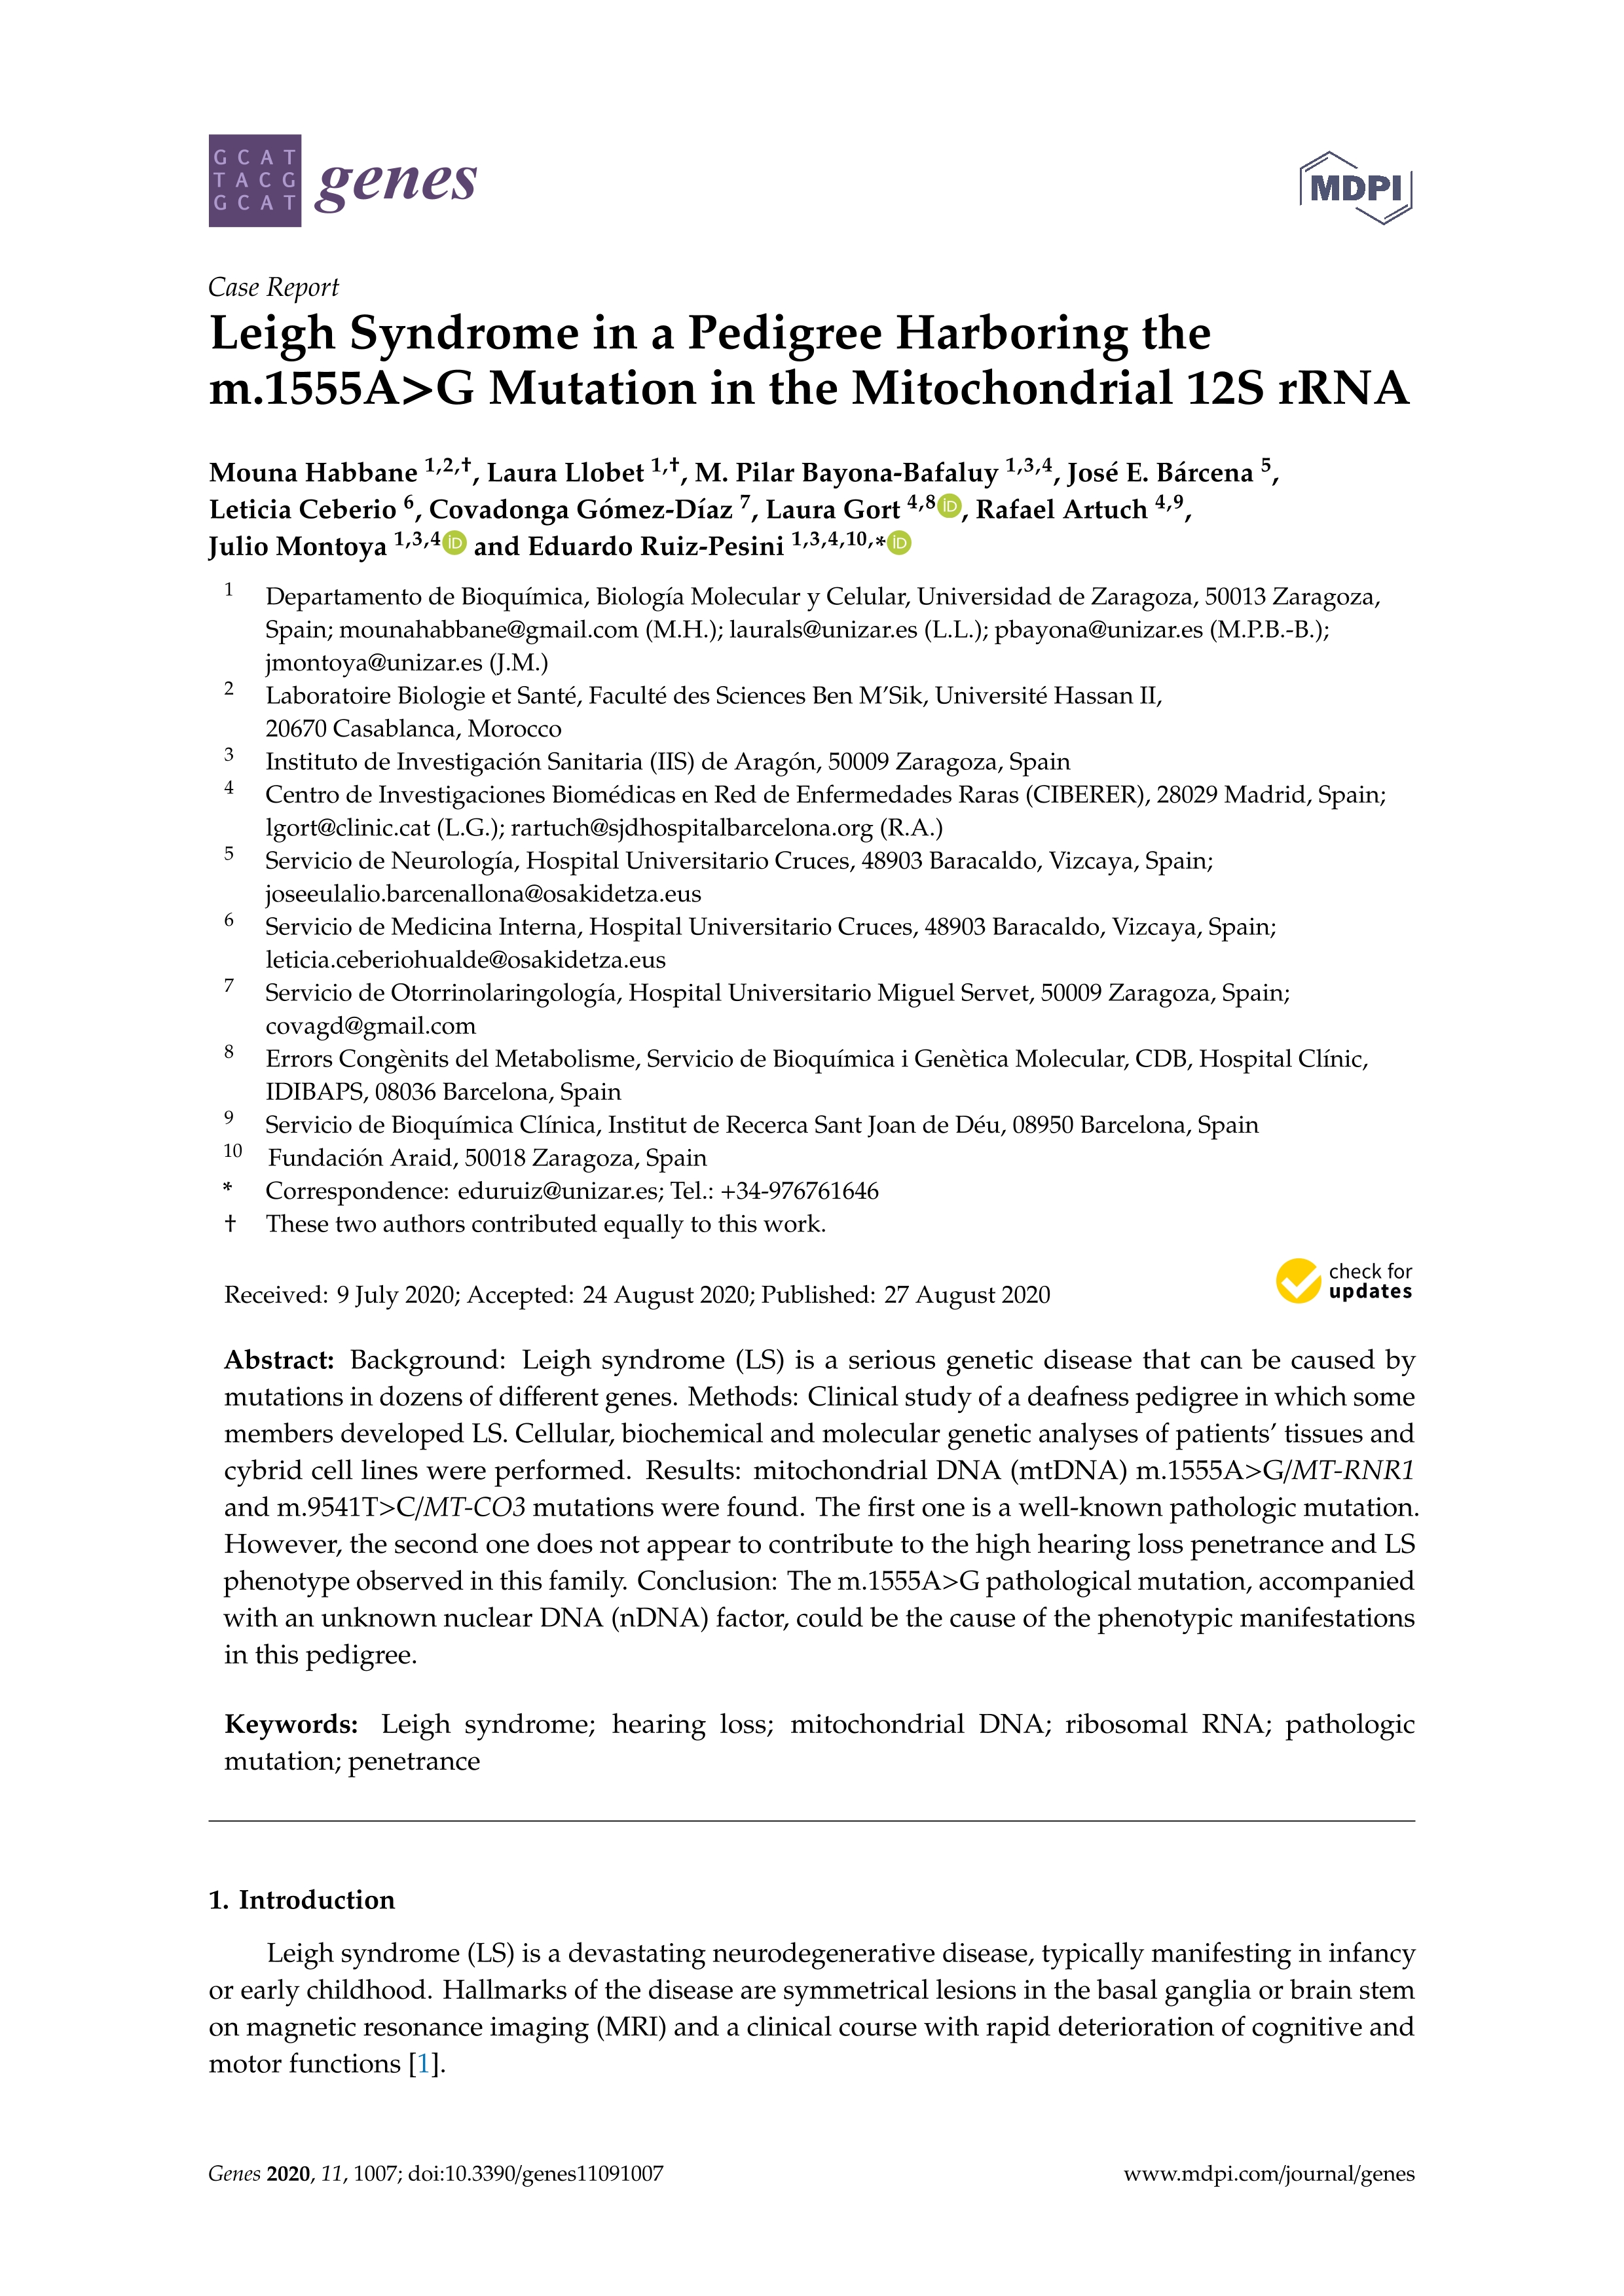 Leigh Syndrome in a Pedigree Harboring the m.1555A>G Mutation in the Mitochondrial 12S rRNA